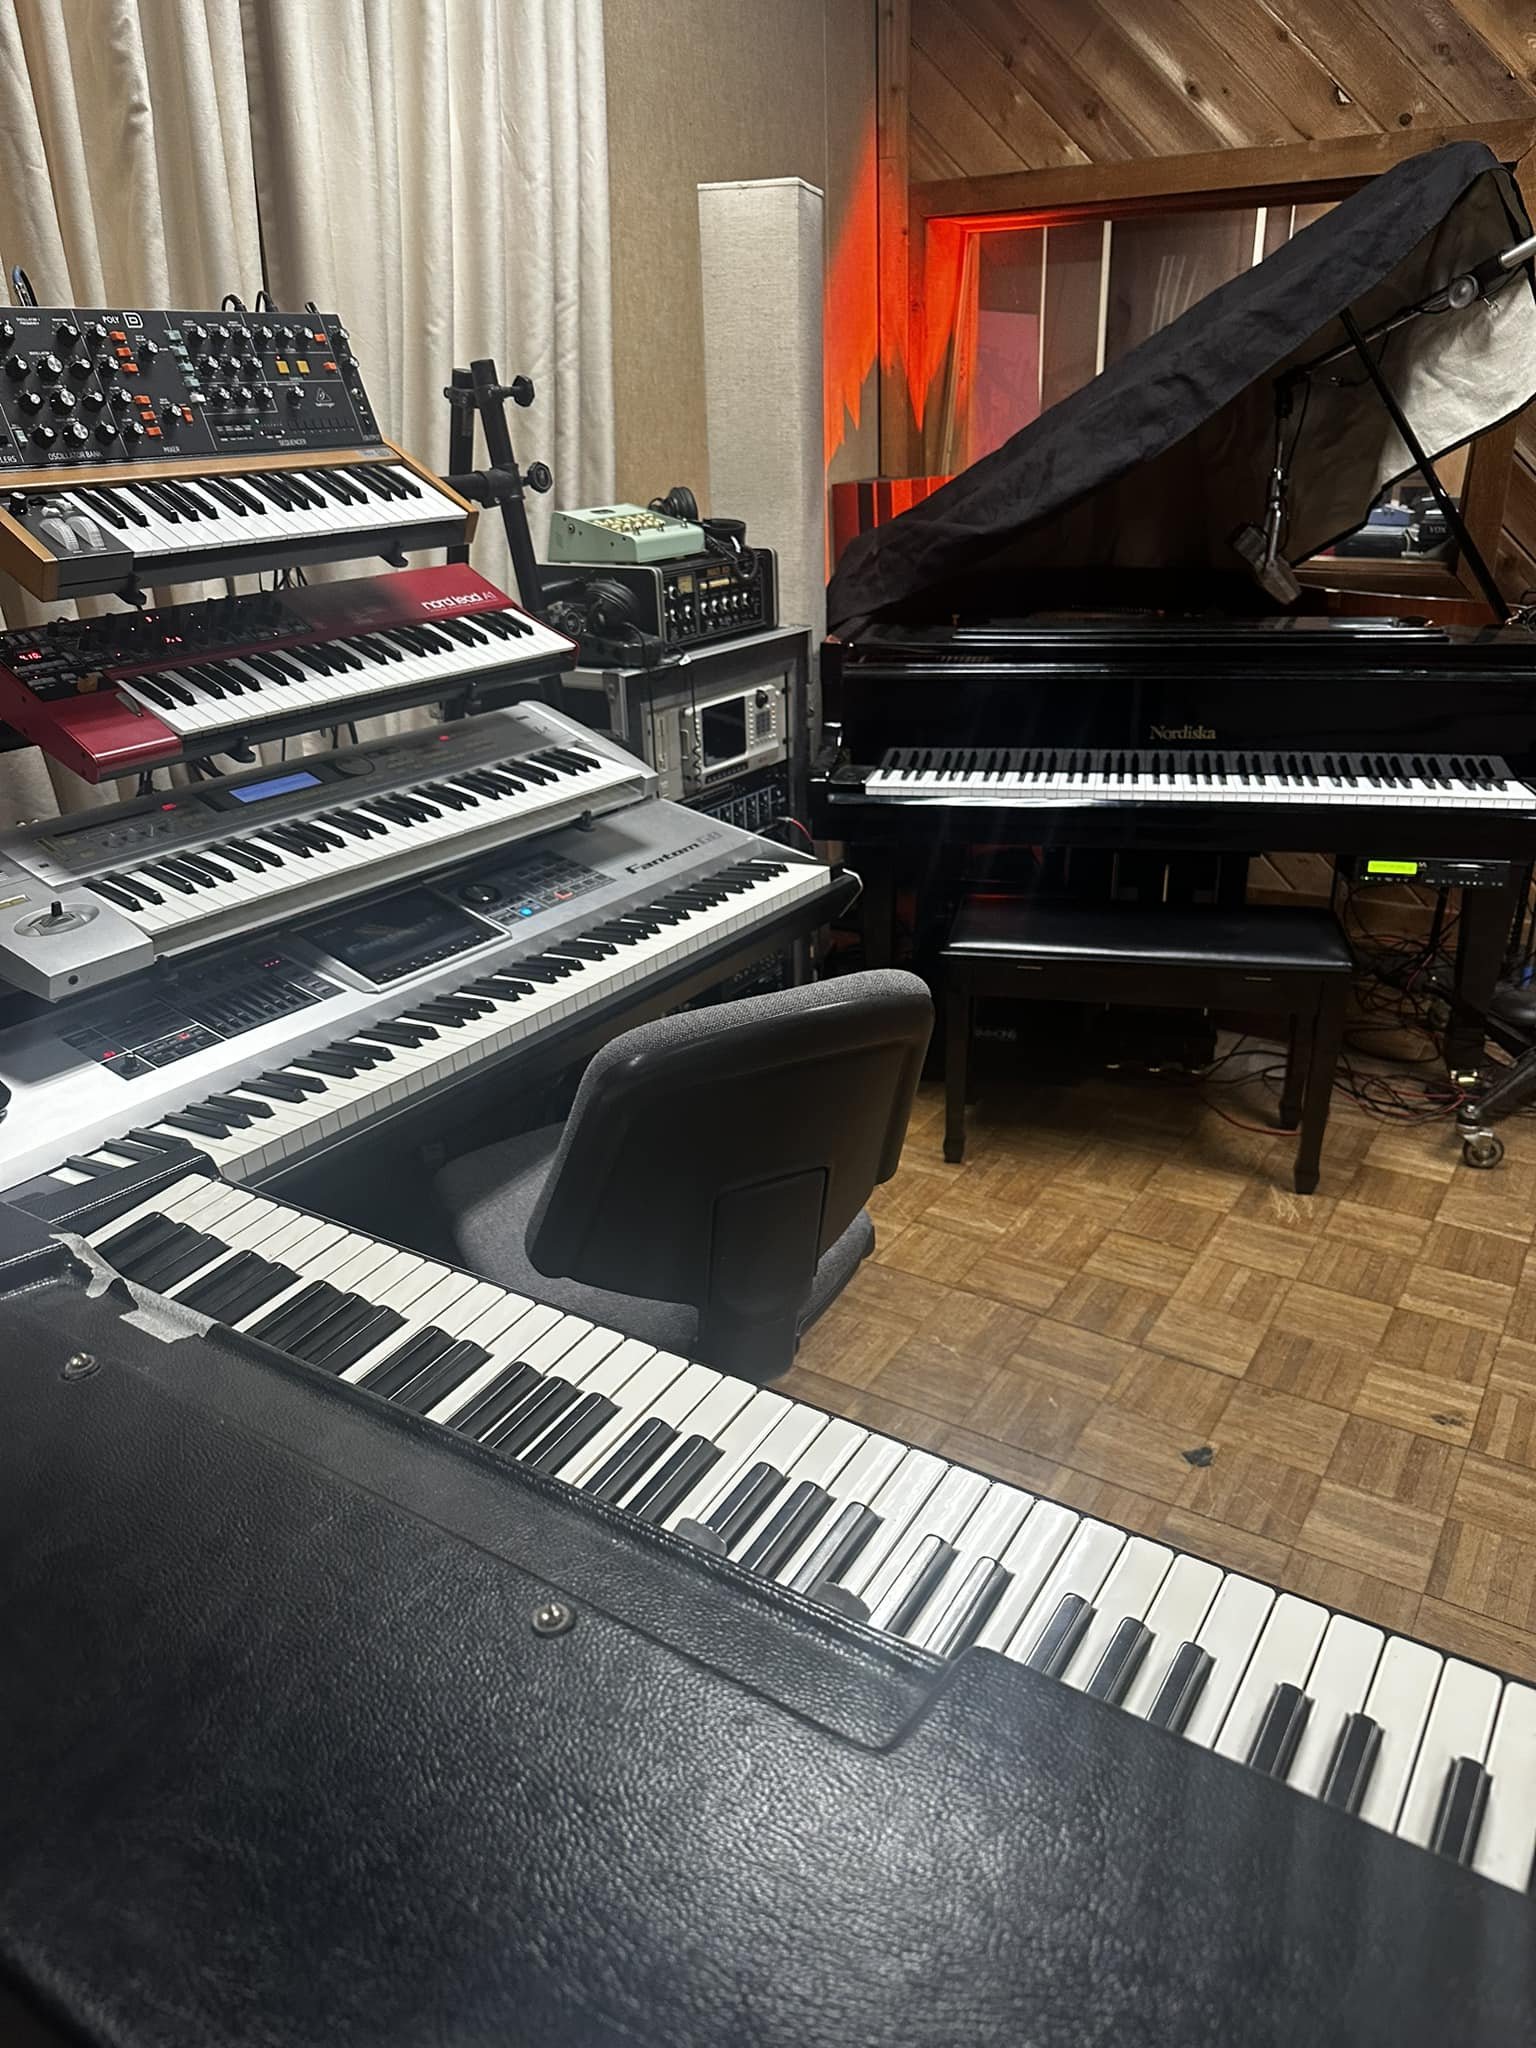 This is the piano rig I started building a year ago today. I recently started working on my own album at the studio, and it has been so inspiring getting to play on this midi station. 

The heart of this rig comes from my Roland fantom g8 keyboard wh